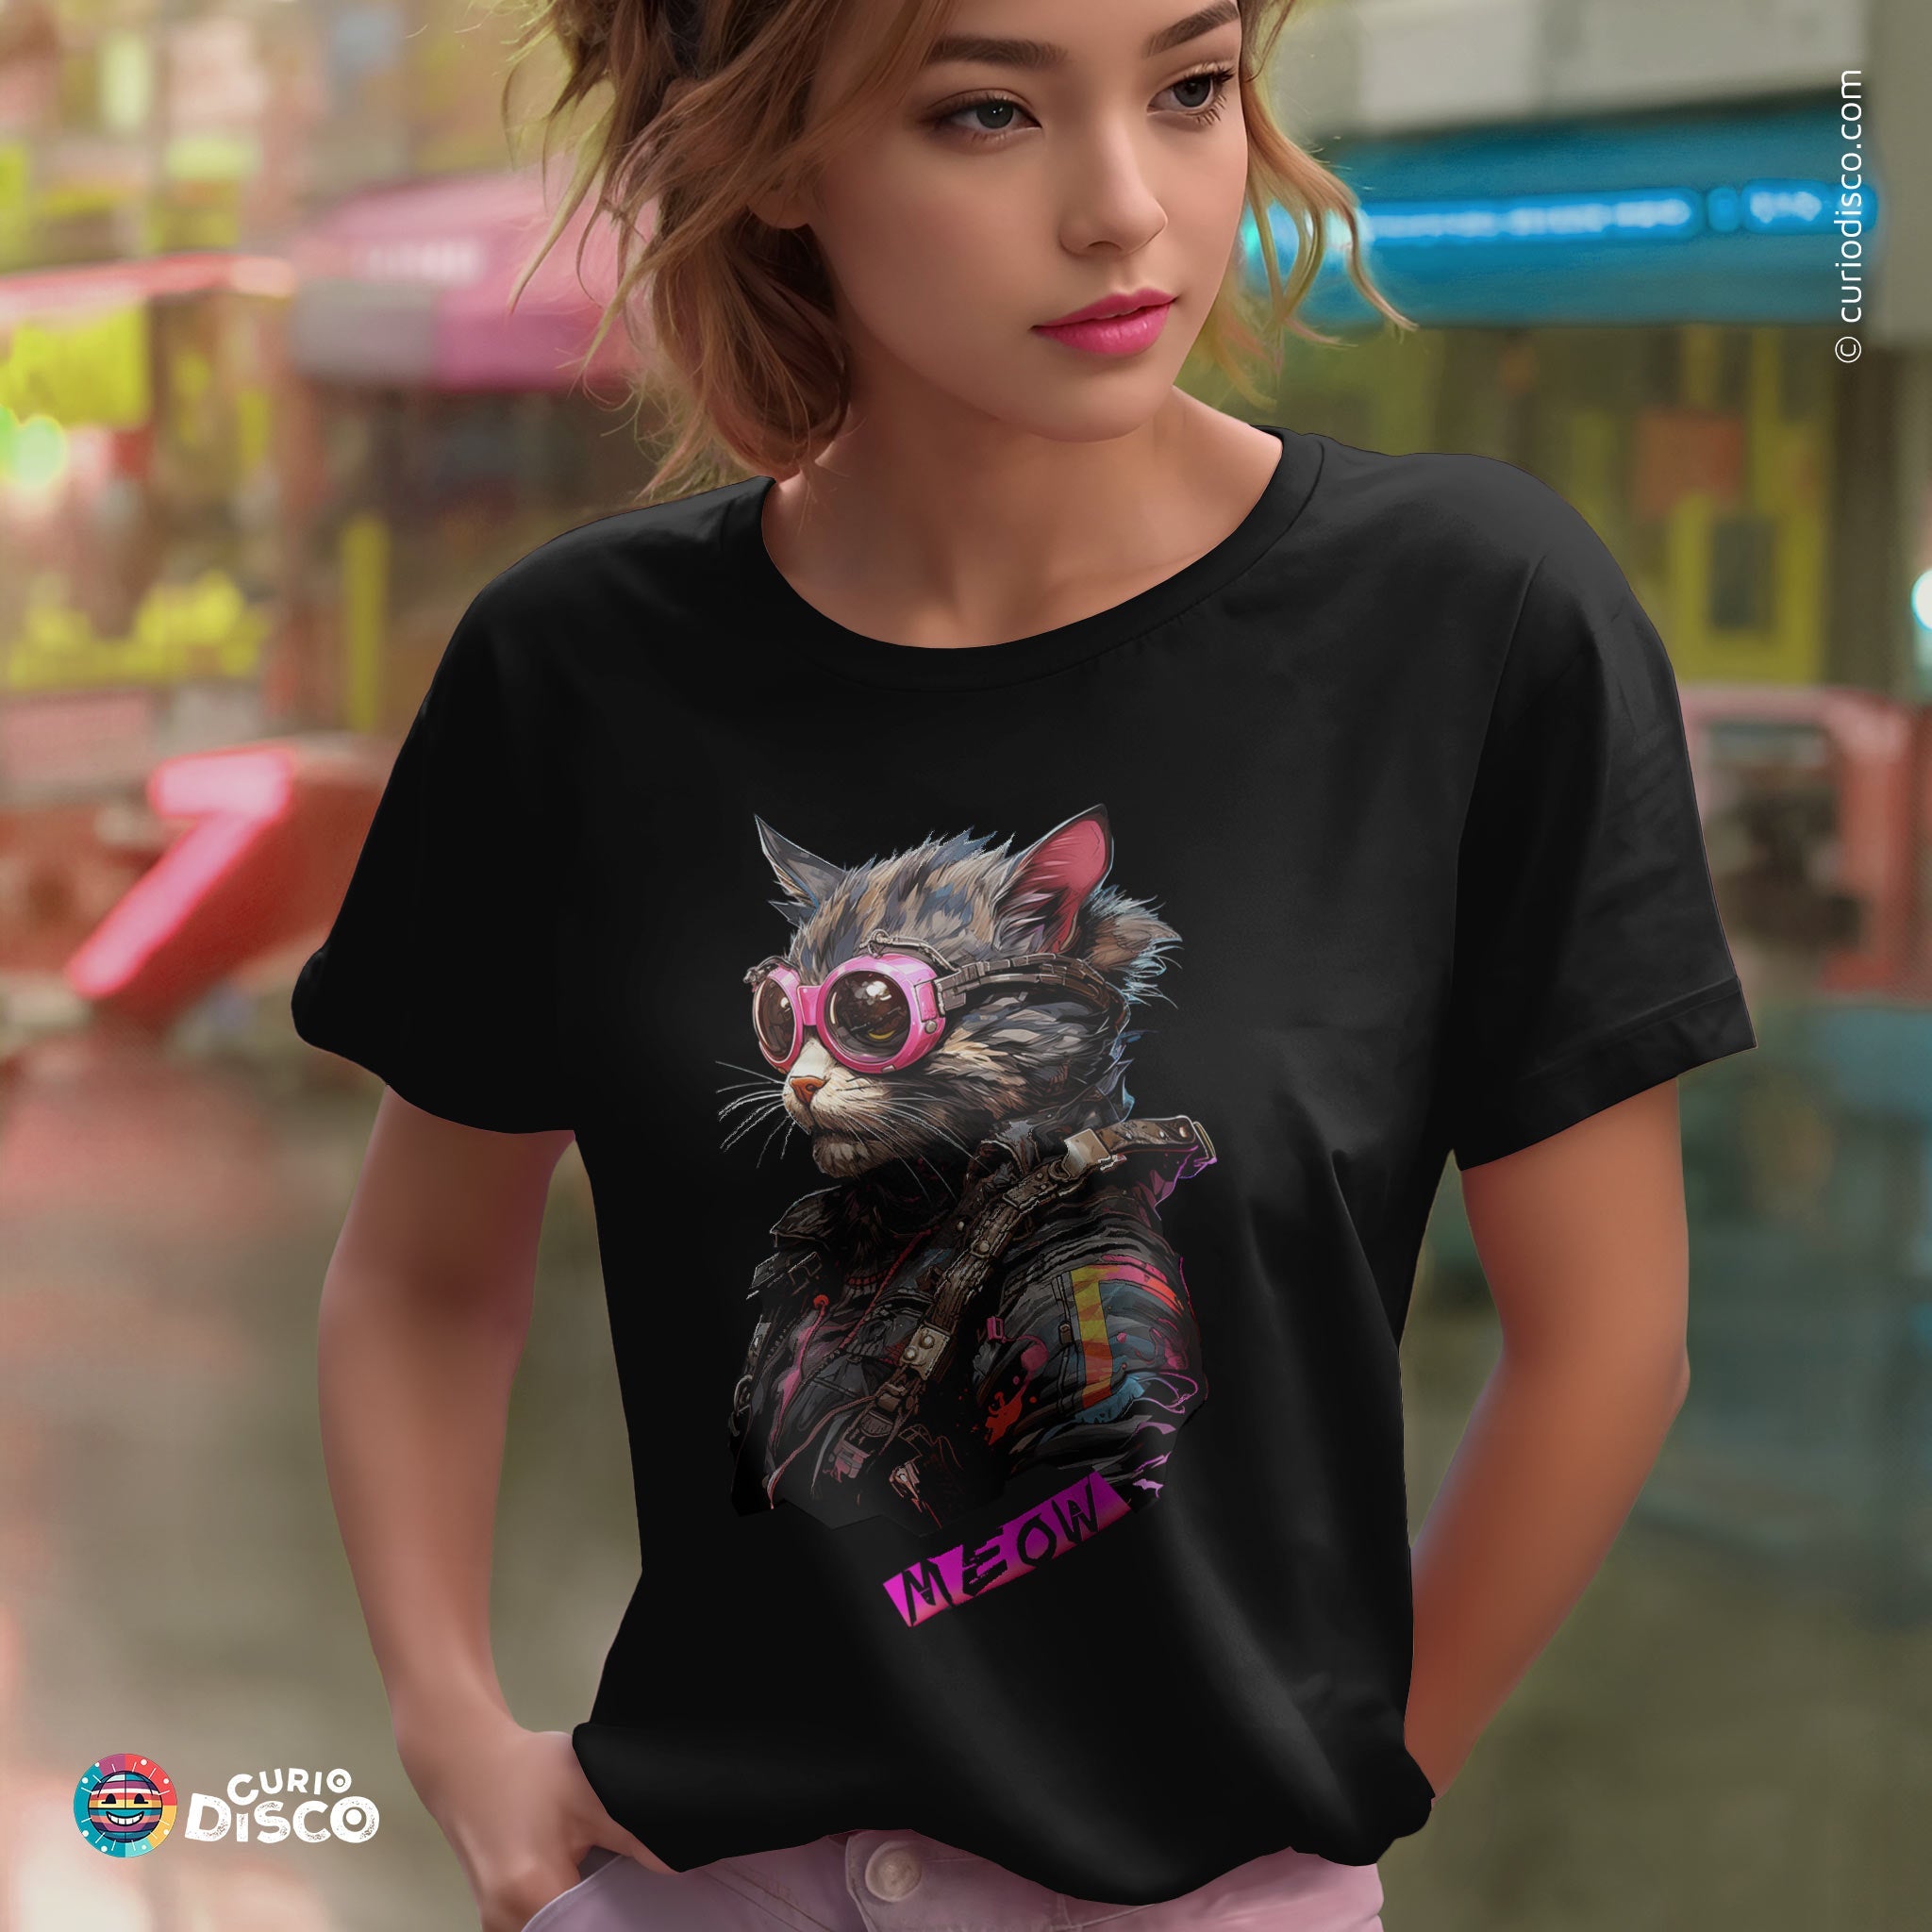 Cyberpunk 2077-inspired T-shirt featuring a unique cyberpunk cat graphic. Women&#39;s short sleeve  tshirt with cat design, soft cotton, casual and party wear, perfect gift for her, gift for gamer, gamer gift.